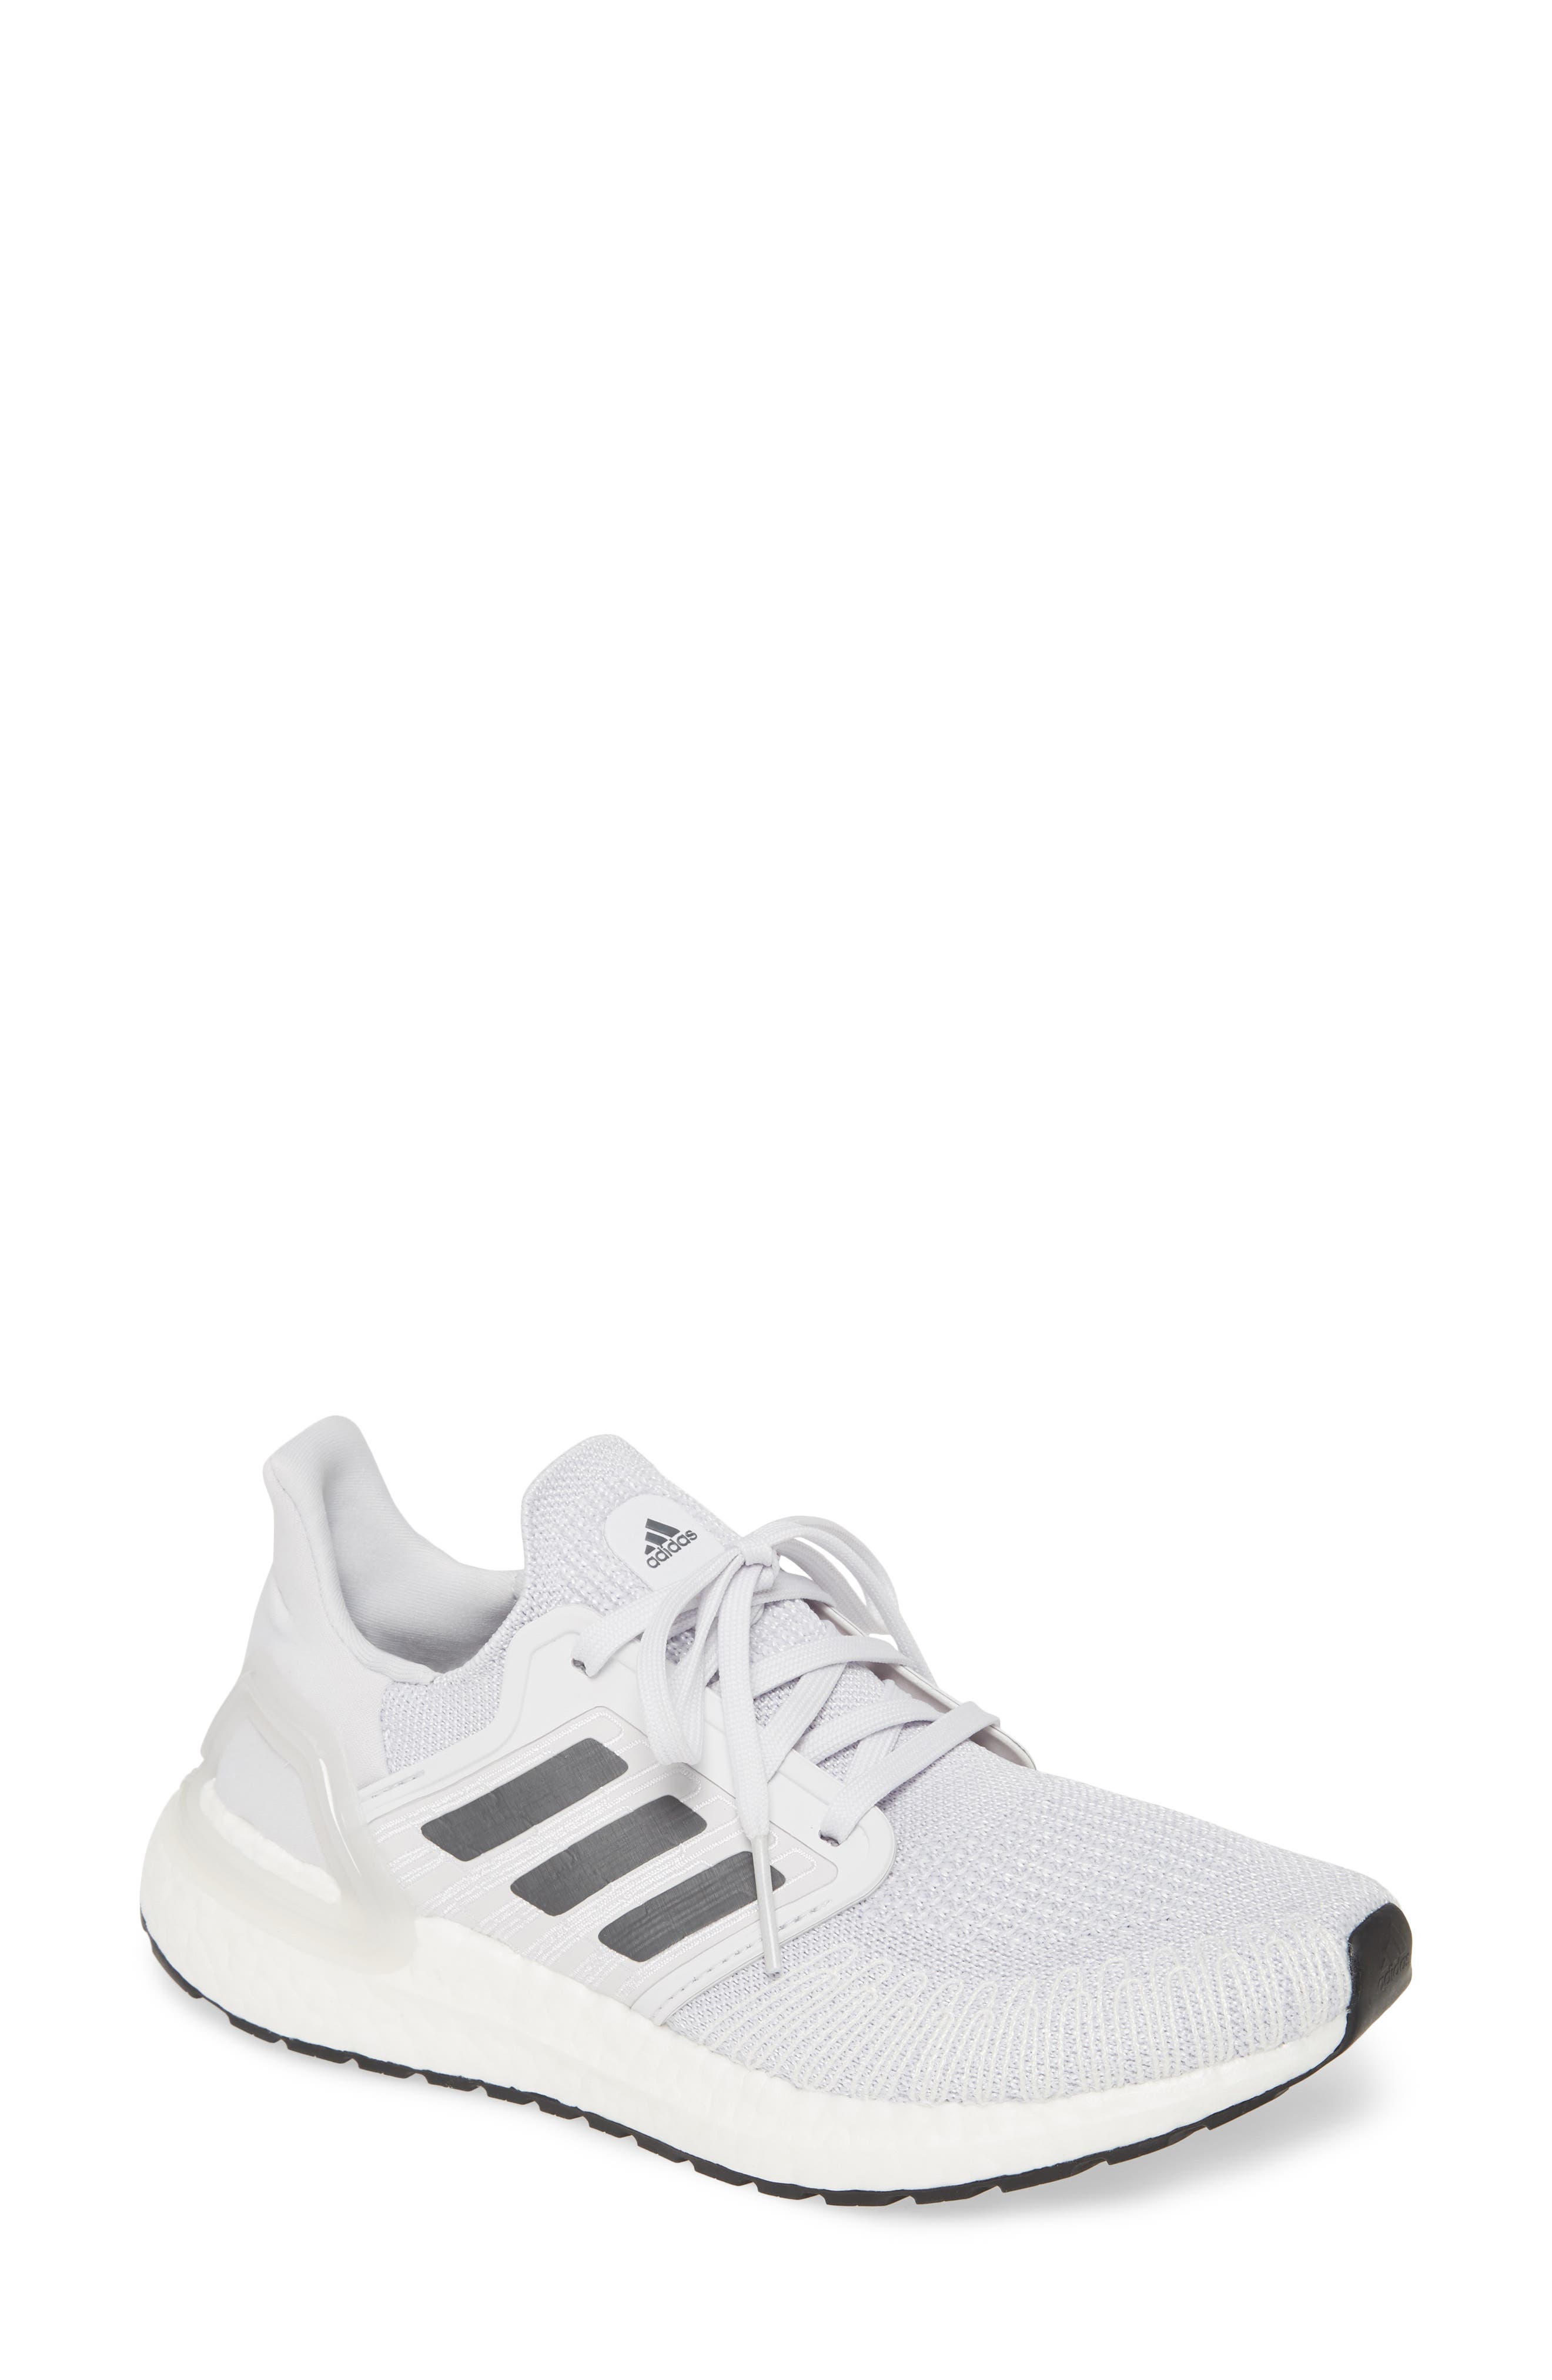 adidas for women on sale